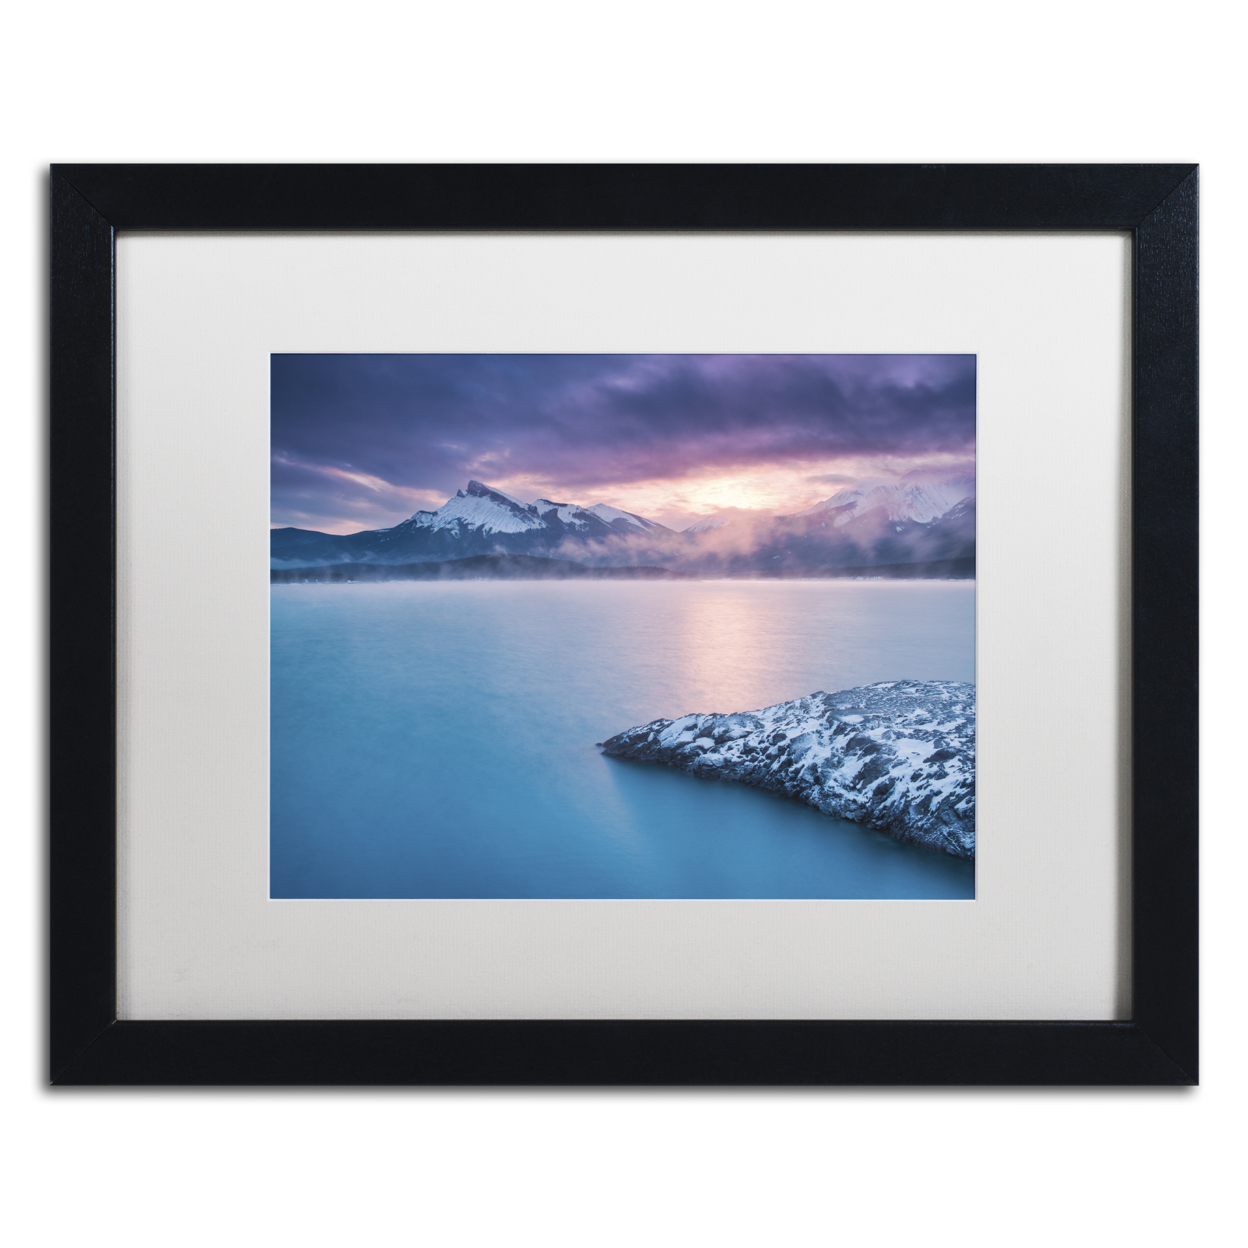 Michael Blanchette Photography 'Windy Point Sunrise' Black Wooden Framed Art 18 X 22 Inches